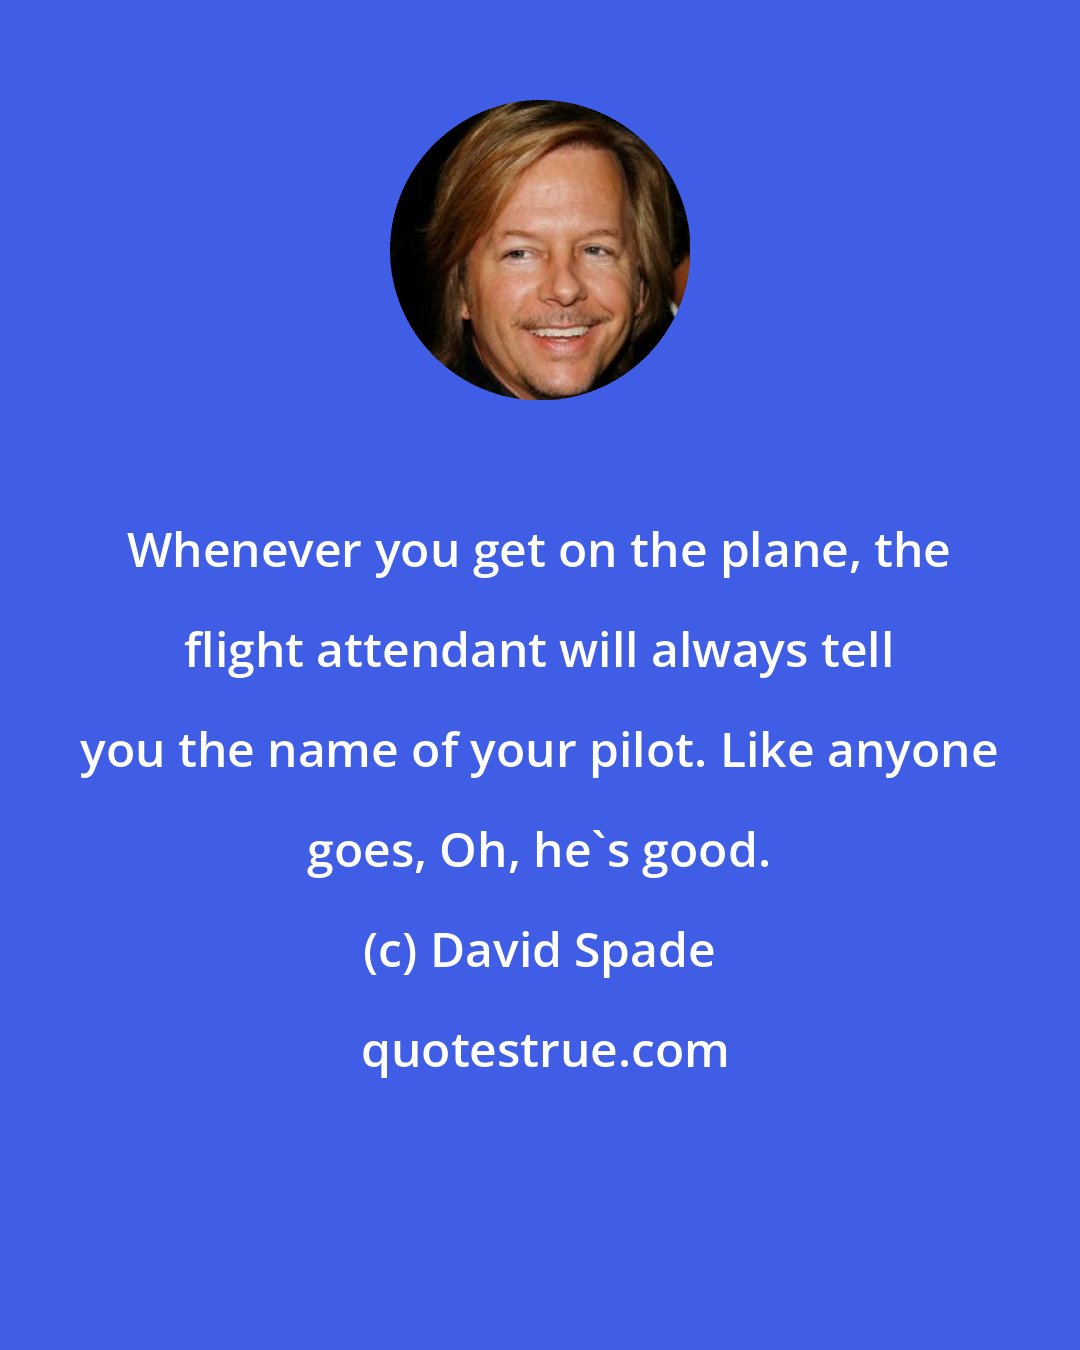 David Spade: Whenever you get on the plane, the flight attendant will always tell you the name of your pilot. Like anyone goes, Oh, he's good.